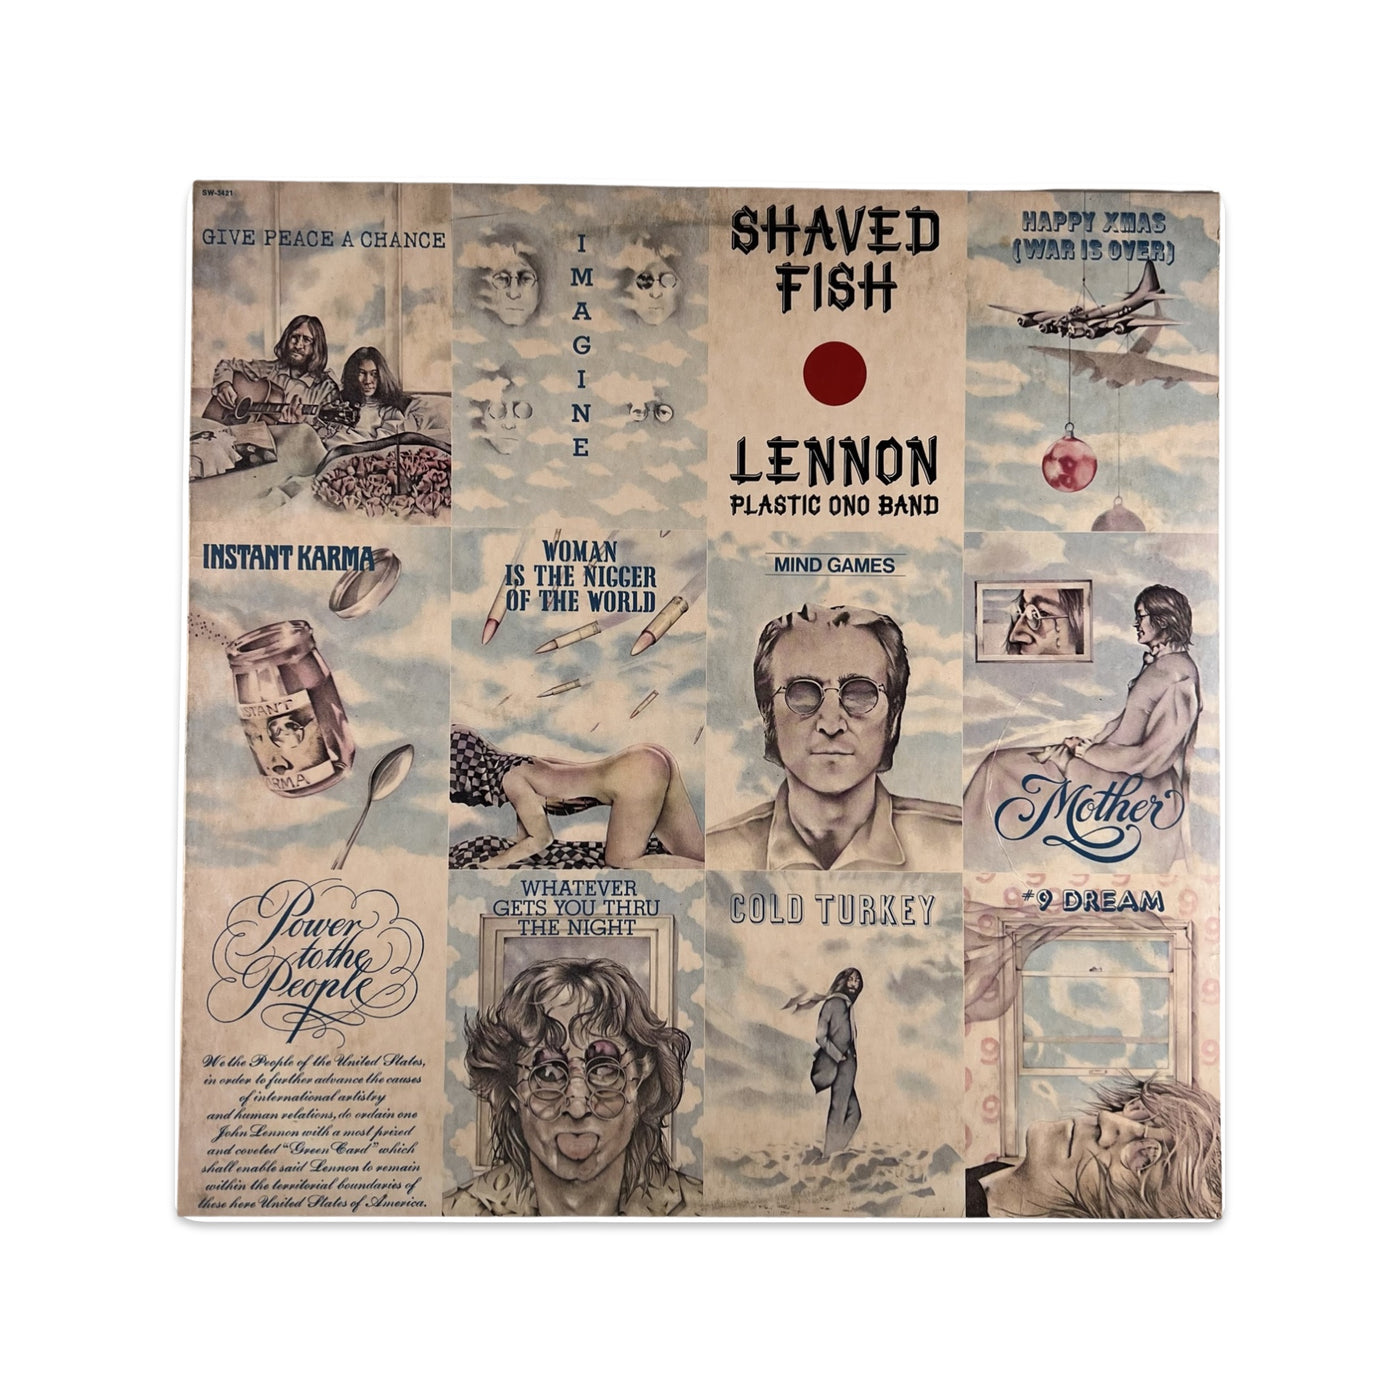 Lennon / Plastic Ono Band – Shaved Fish - 1983 Reissue